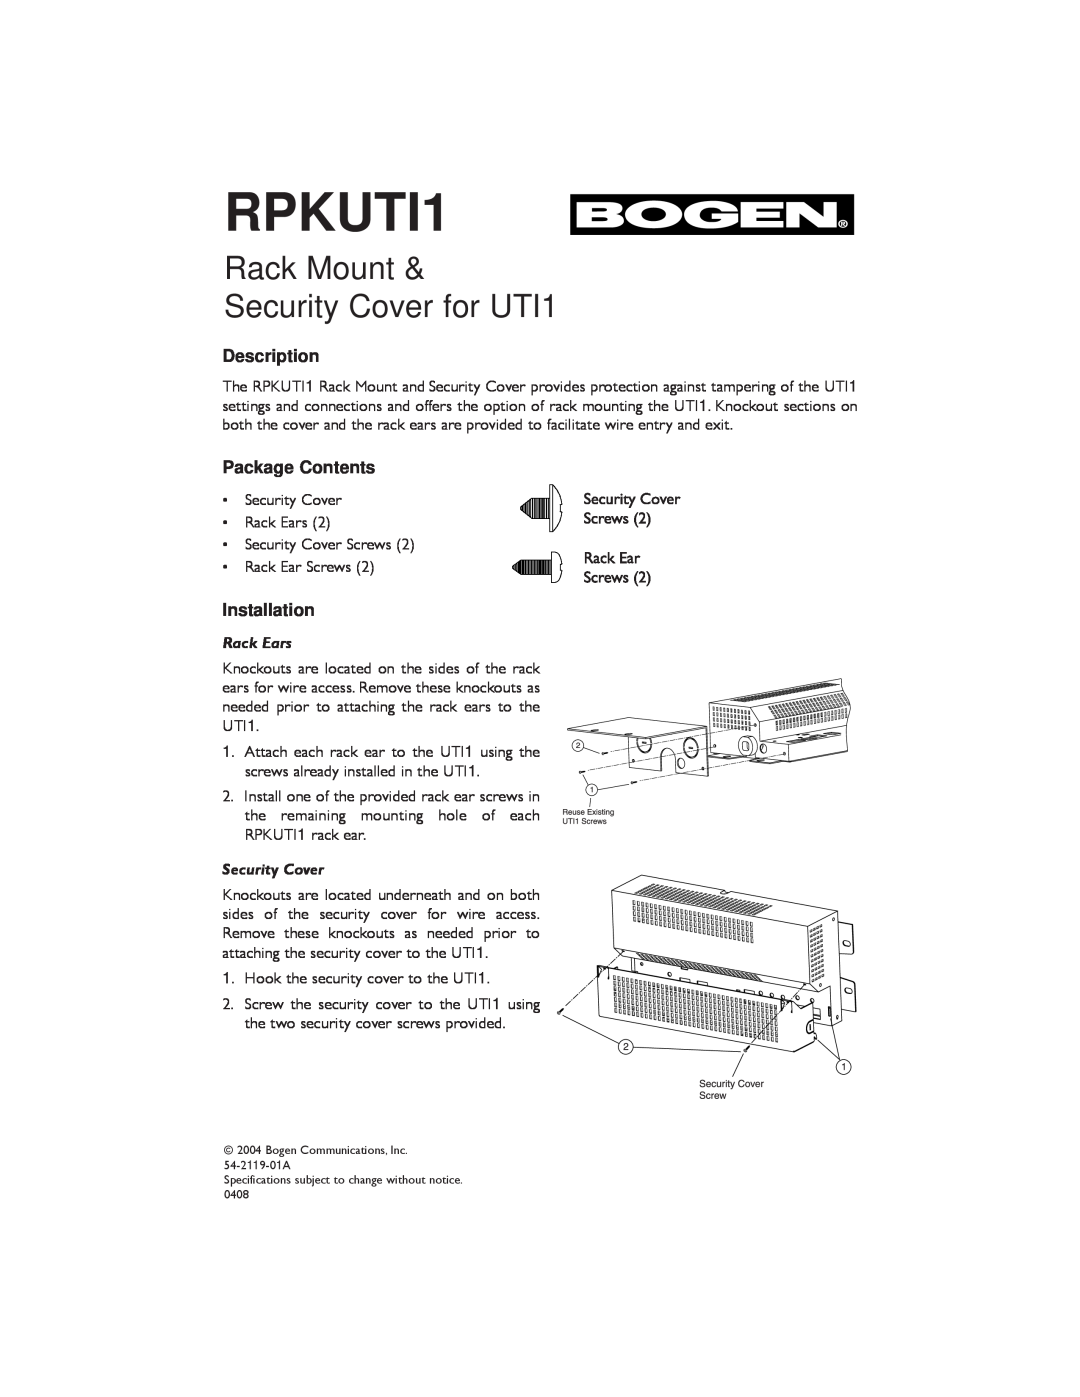 Bogen RPKUTI1 specifications Description, Package Contents, Installation, Rack Mount Security Cover for UTI1, Rack Ears 